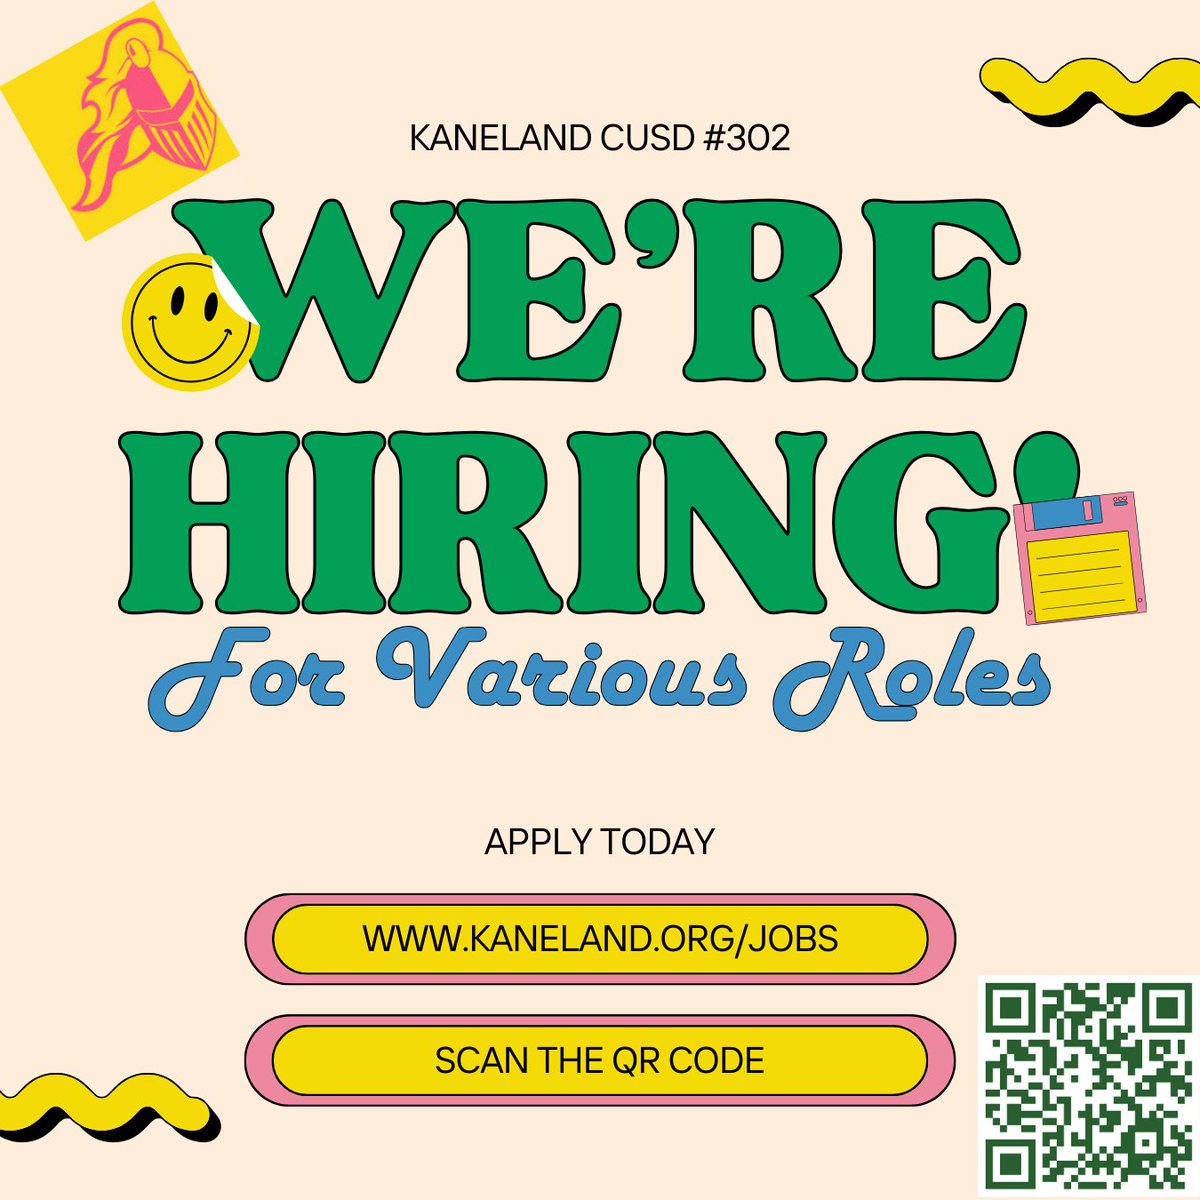 🤩 Kaneland CUSD #302 is hiring for various roles across the district. If you want to join our team, visit our website kaneland.org/jobs or scan the QR code to view current job openings and submit your application today! We're looking forward to hearing from you. 

#hiring